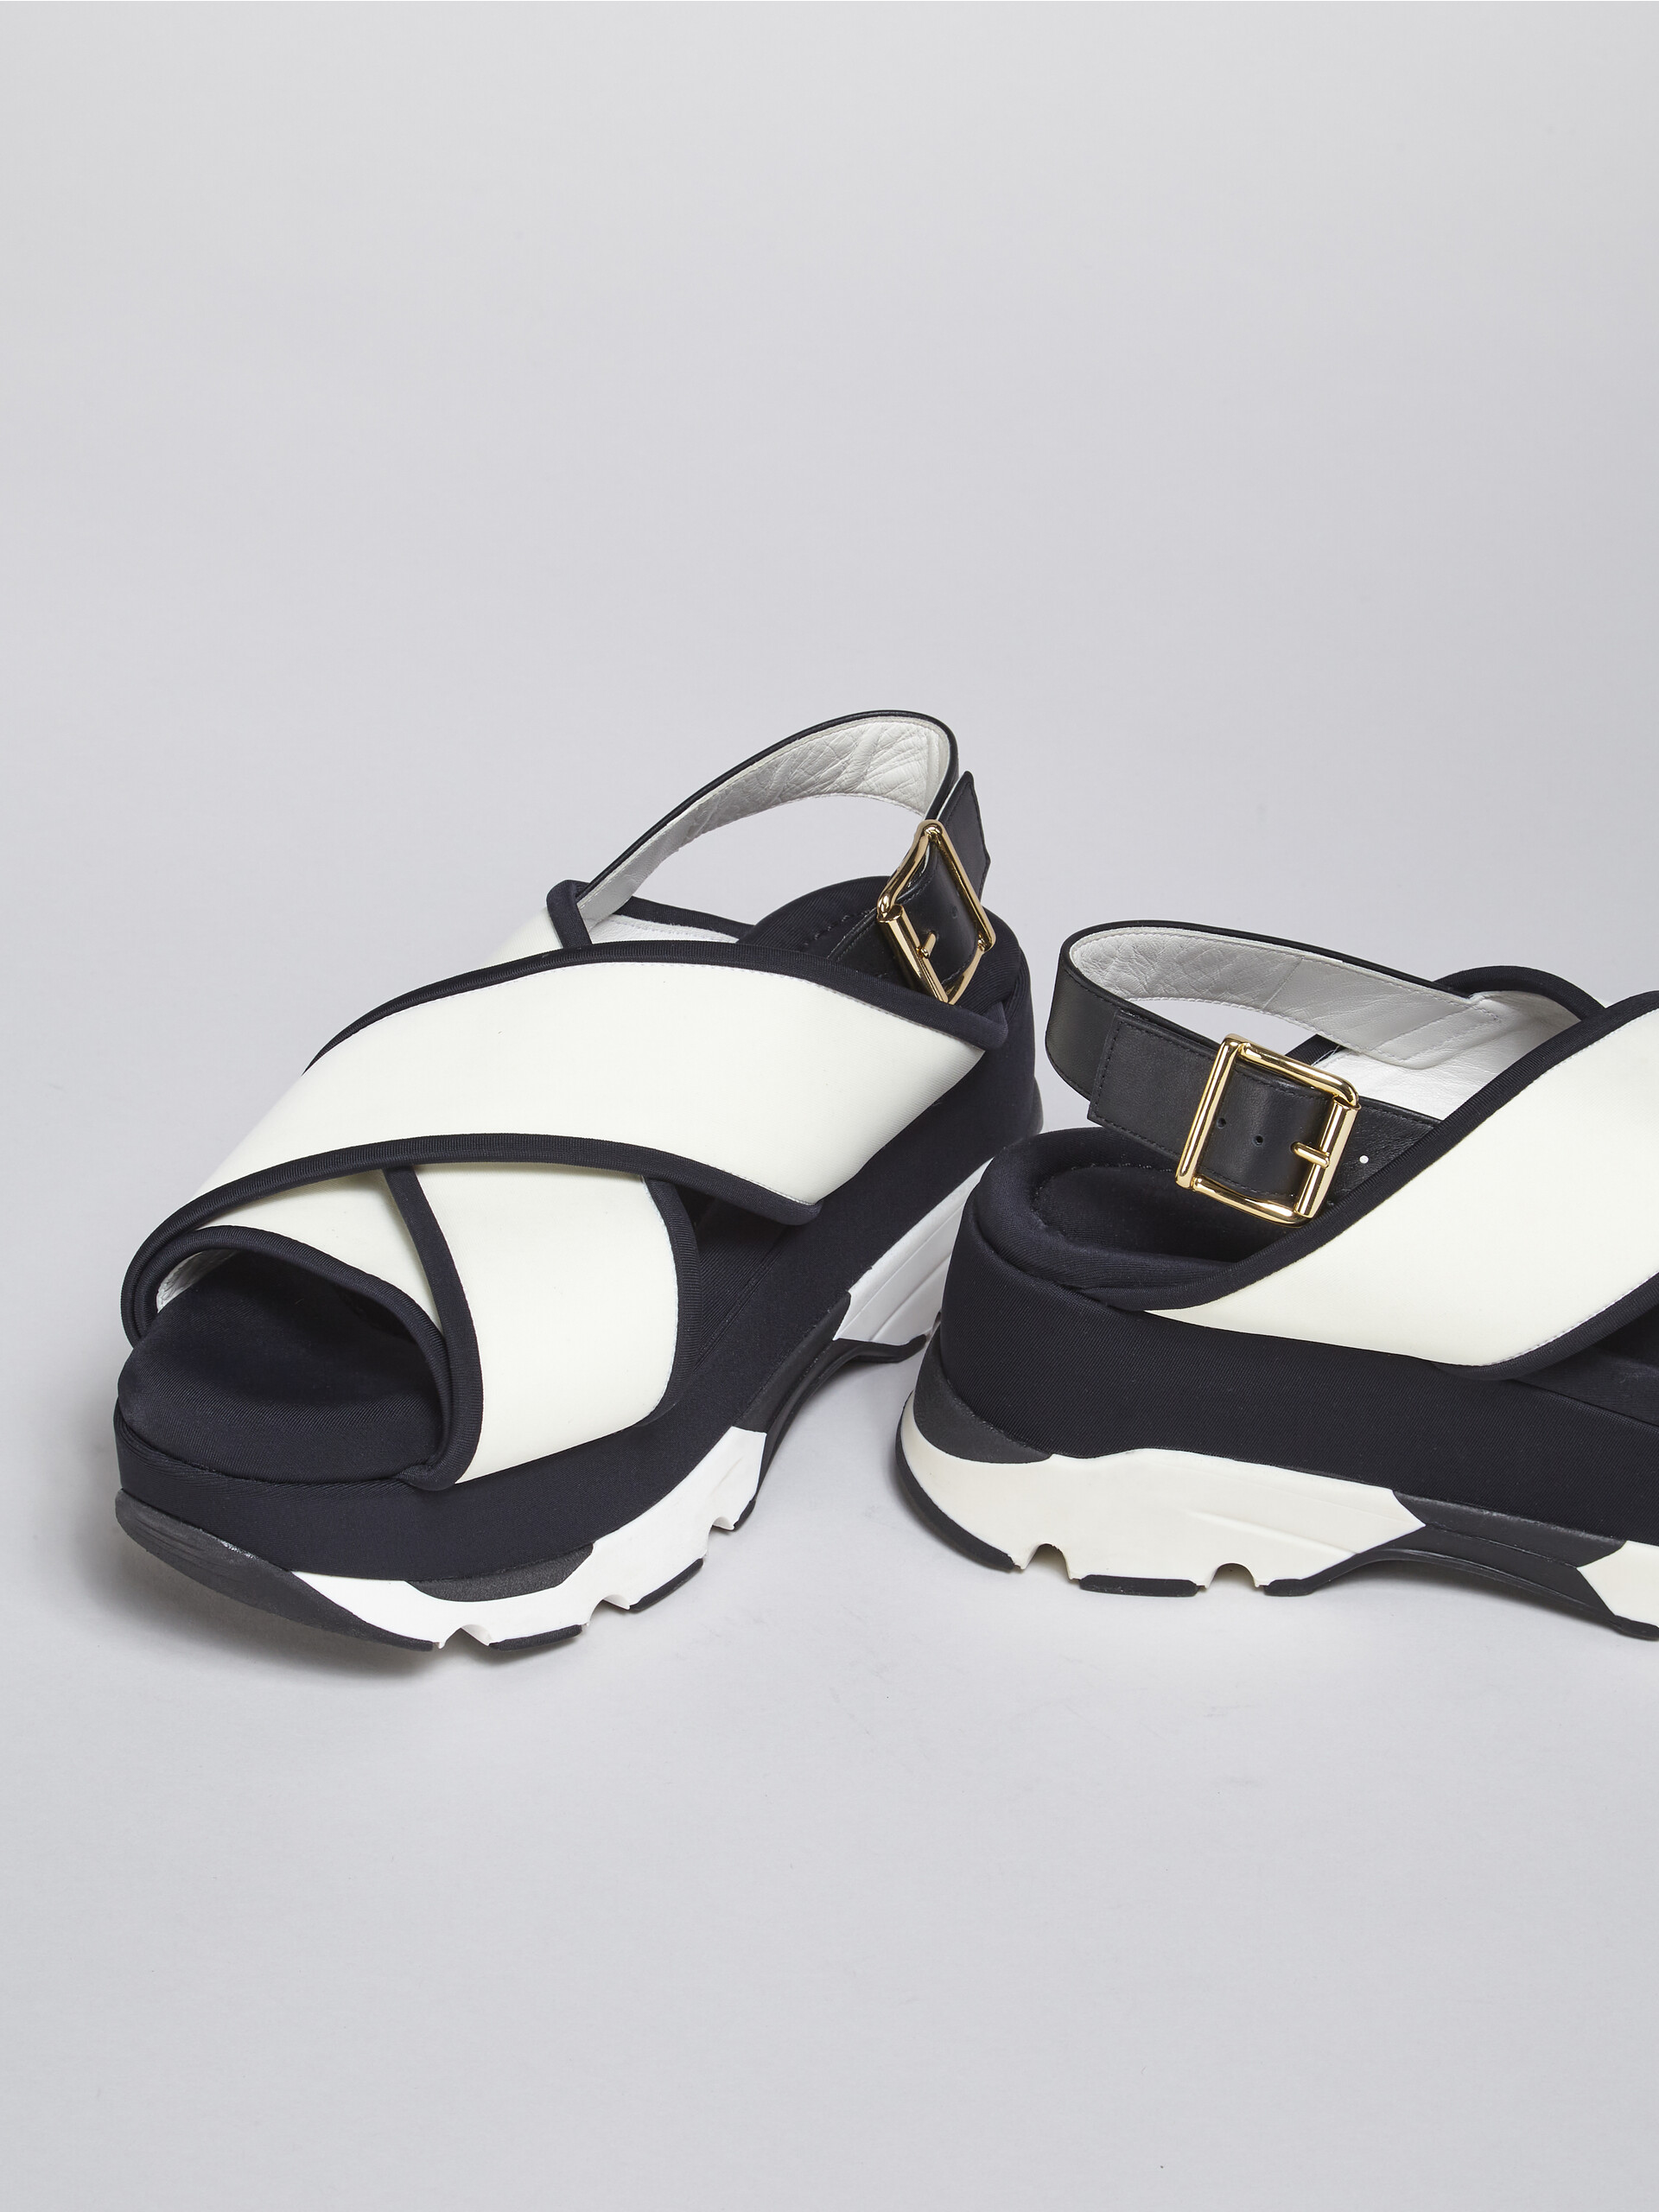 White and black technical fabric wedge sandal - Sandals - Image 5